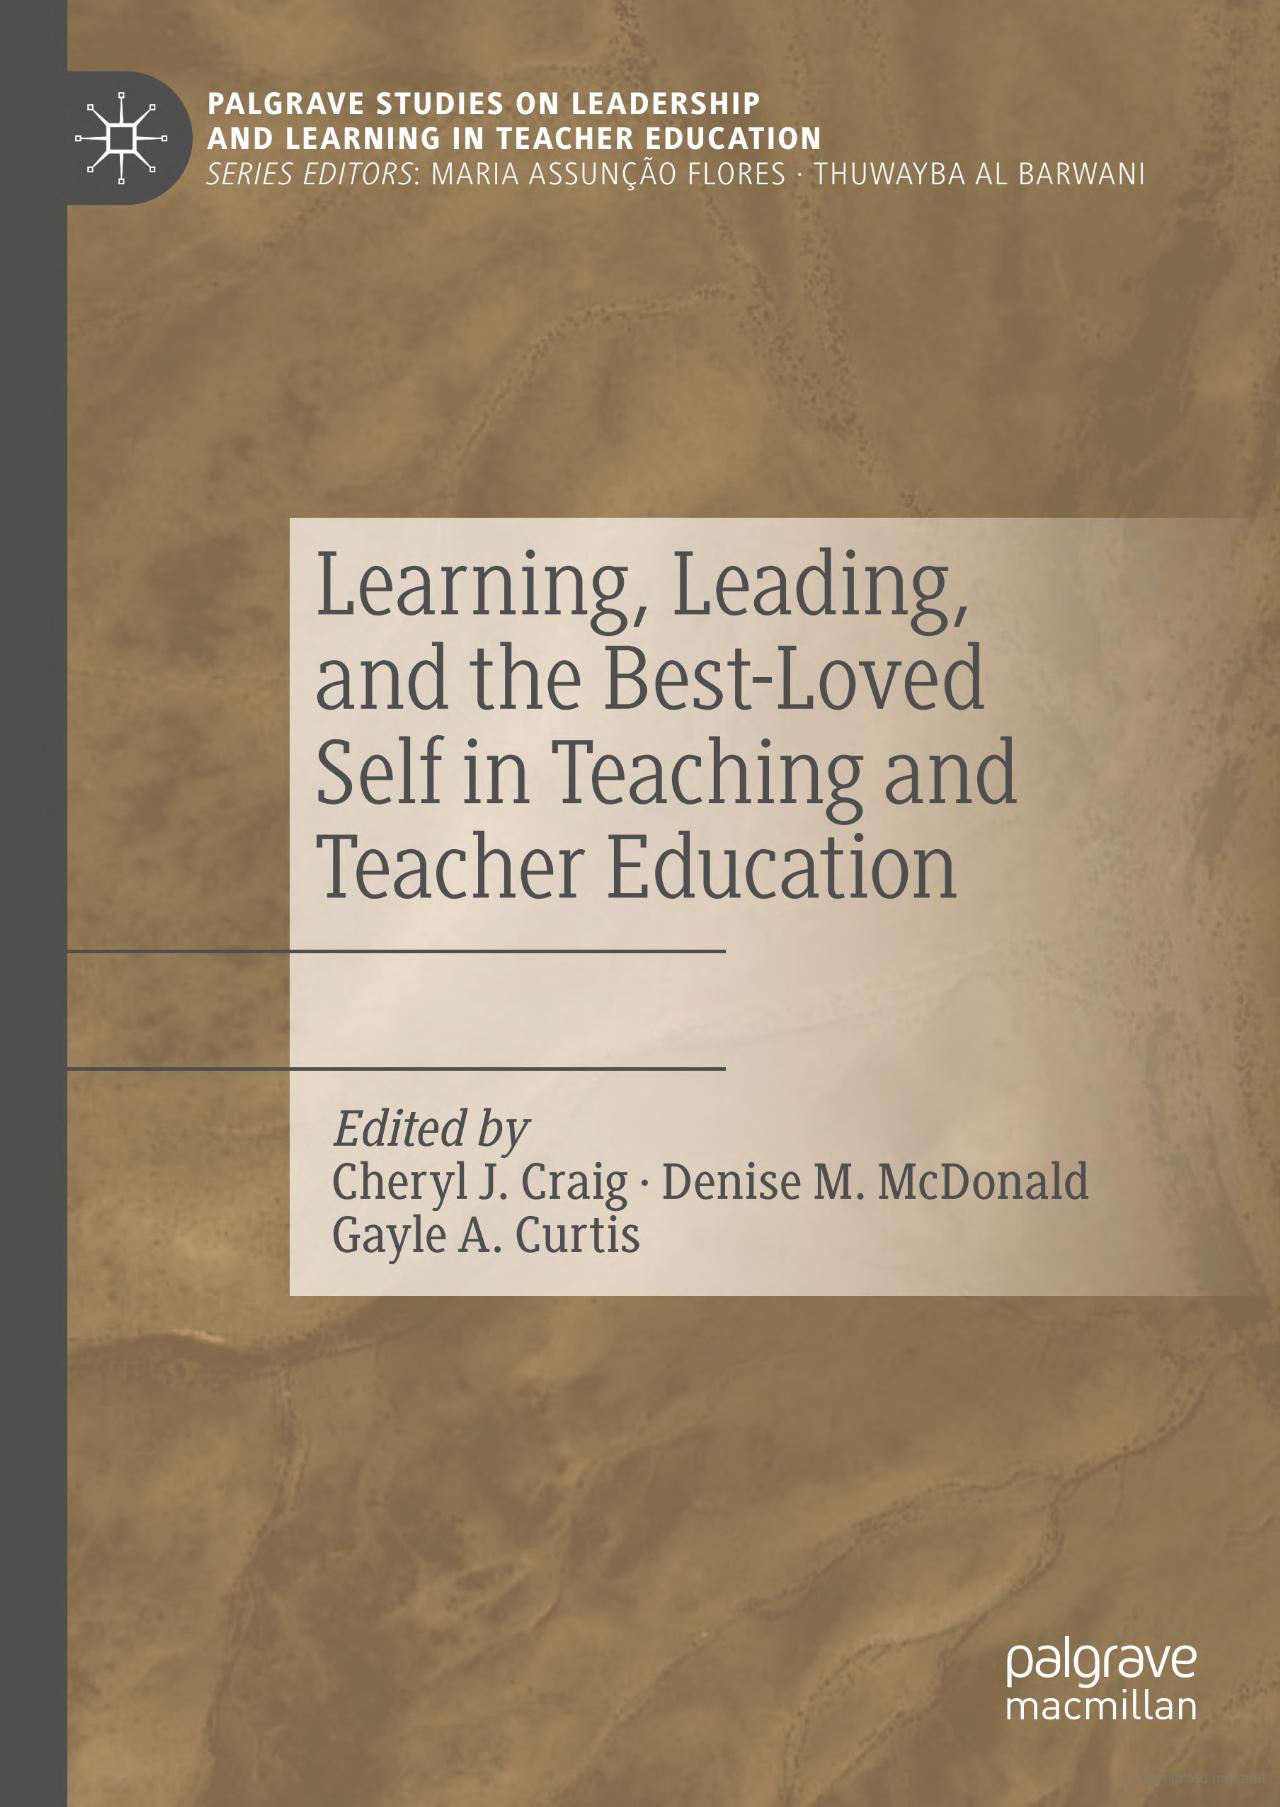 Learning, Leading, and the Best-Loved Self in Teaching and Teacher Education (1)